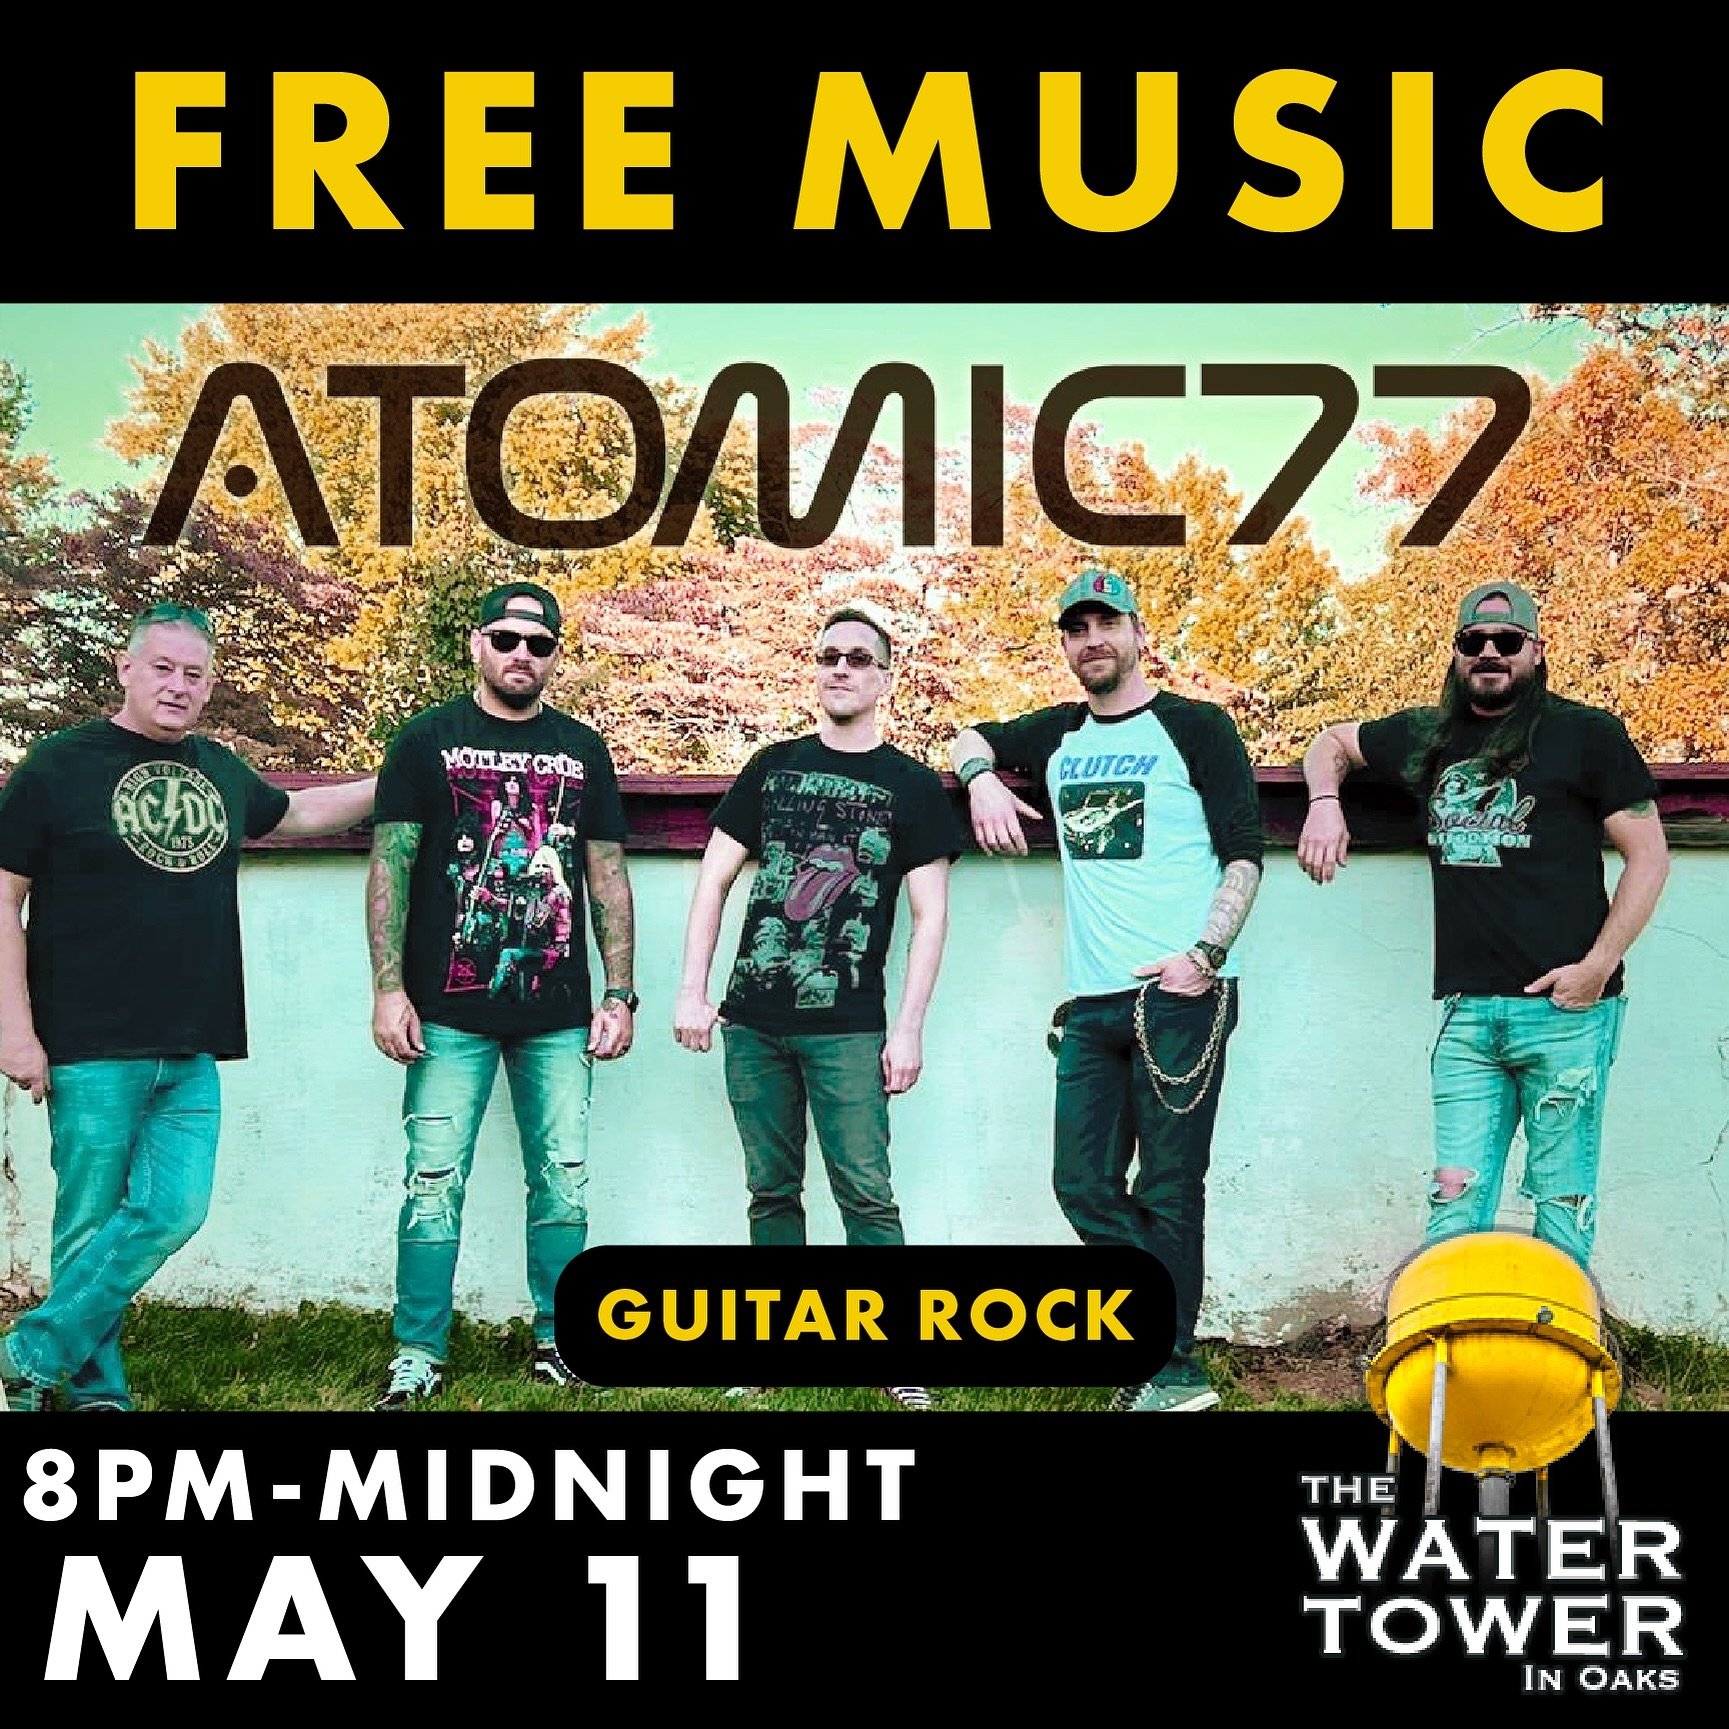 ☢️Get ready for some Radioactive energy with Atomic 77 @atomic77band playing The Water Tower this Saturday (May 11th) from 8-Midnight! This 🎸guitar rock band is playing all the hits from the 60s through the 2000s.

‼️This event is sponsored by Arnol